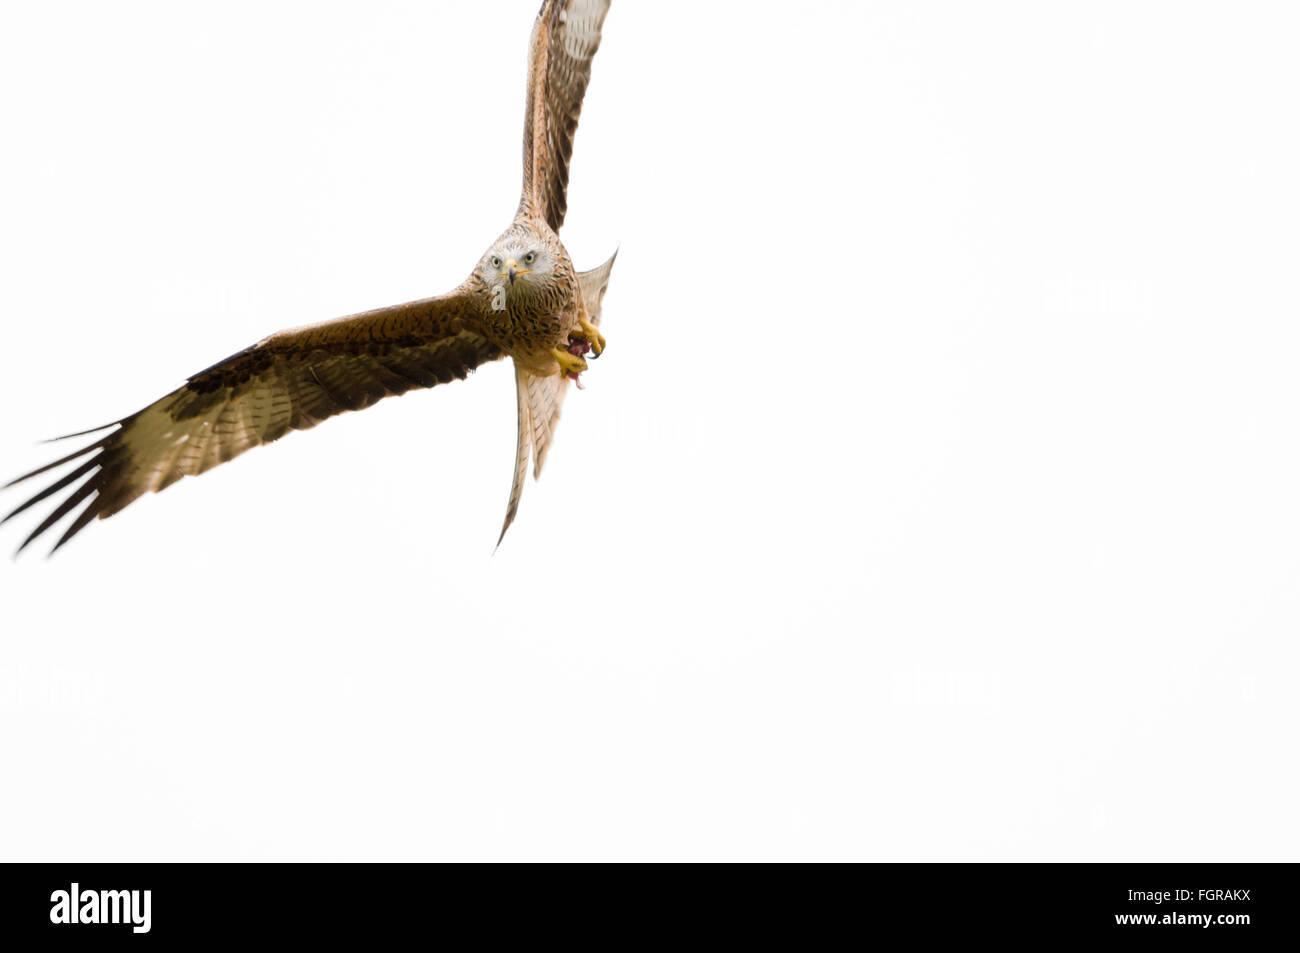 A single red kite, Milvus milvus, with its wings outspread prepares looks for food as it soars against a pale grey winter sky Stock Photo